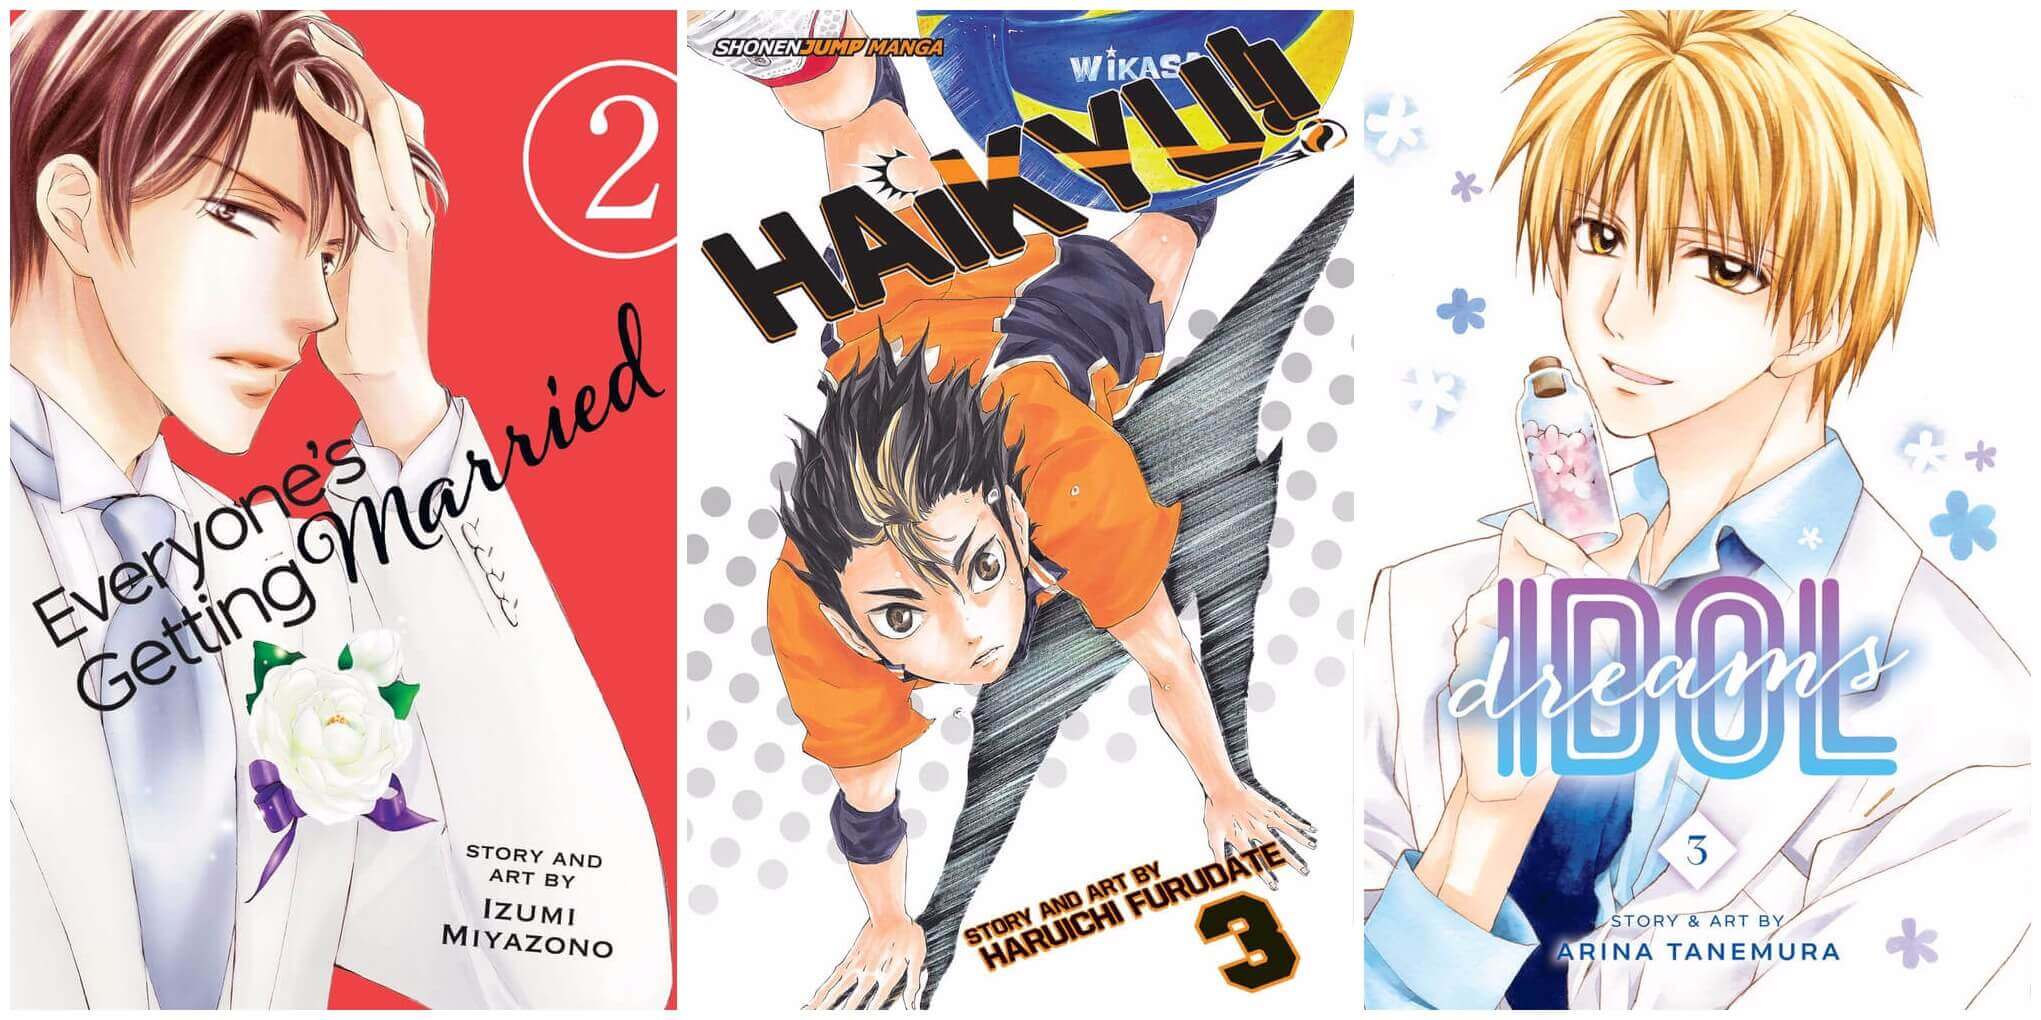 September 2016 Manga Releases Covers for Everyone's Getting Married, Haikyu!!, and Idol Dreams.